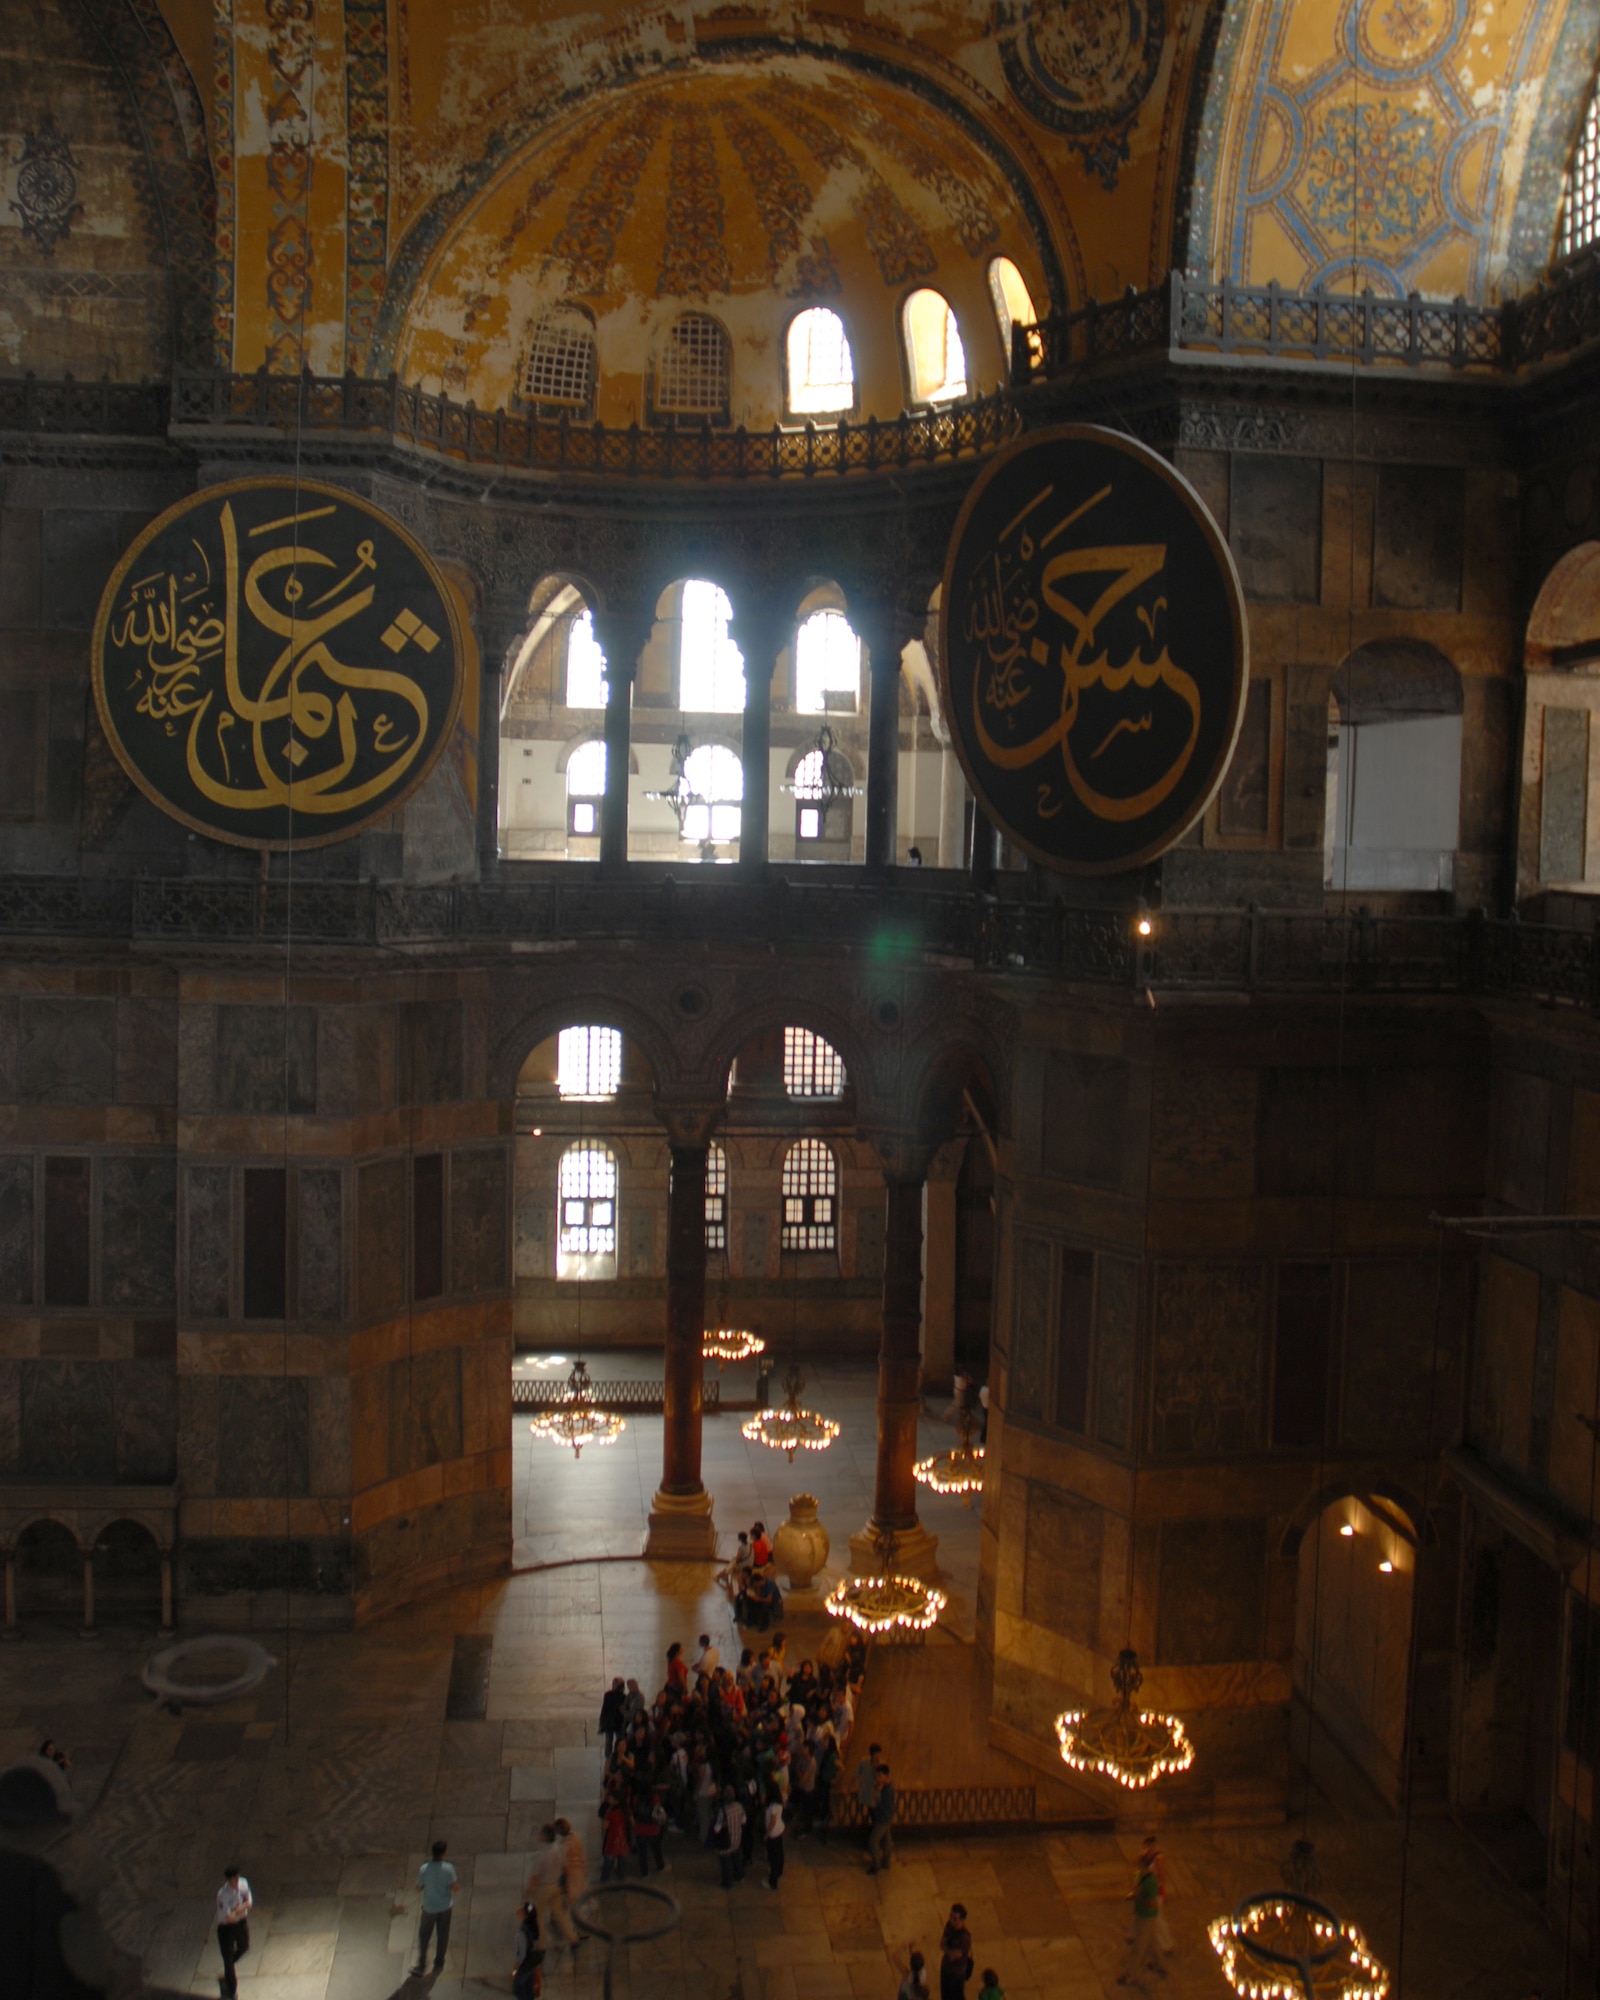 Two large medallions hang from the walls at the Aya Sofya in Istanbul Turkey. The medallions were crafted by master calligrapher Mastafa Izzet Efendi. The Aya Sofya or as it is called in English, the Church of the Divine Wisdom, was completed in 537 AD by Roman Emperor Justinian as a church and then was converted to a mosque in 1453 by Mehmet the Conqueror.  In 1935 Ataturk proclaimed the mosque a museum.  (U.S. Air Force photo/Staff Sgt. Lauren Padden)
